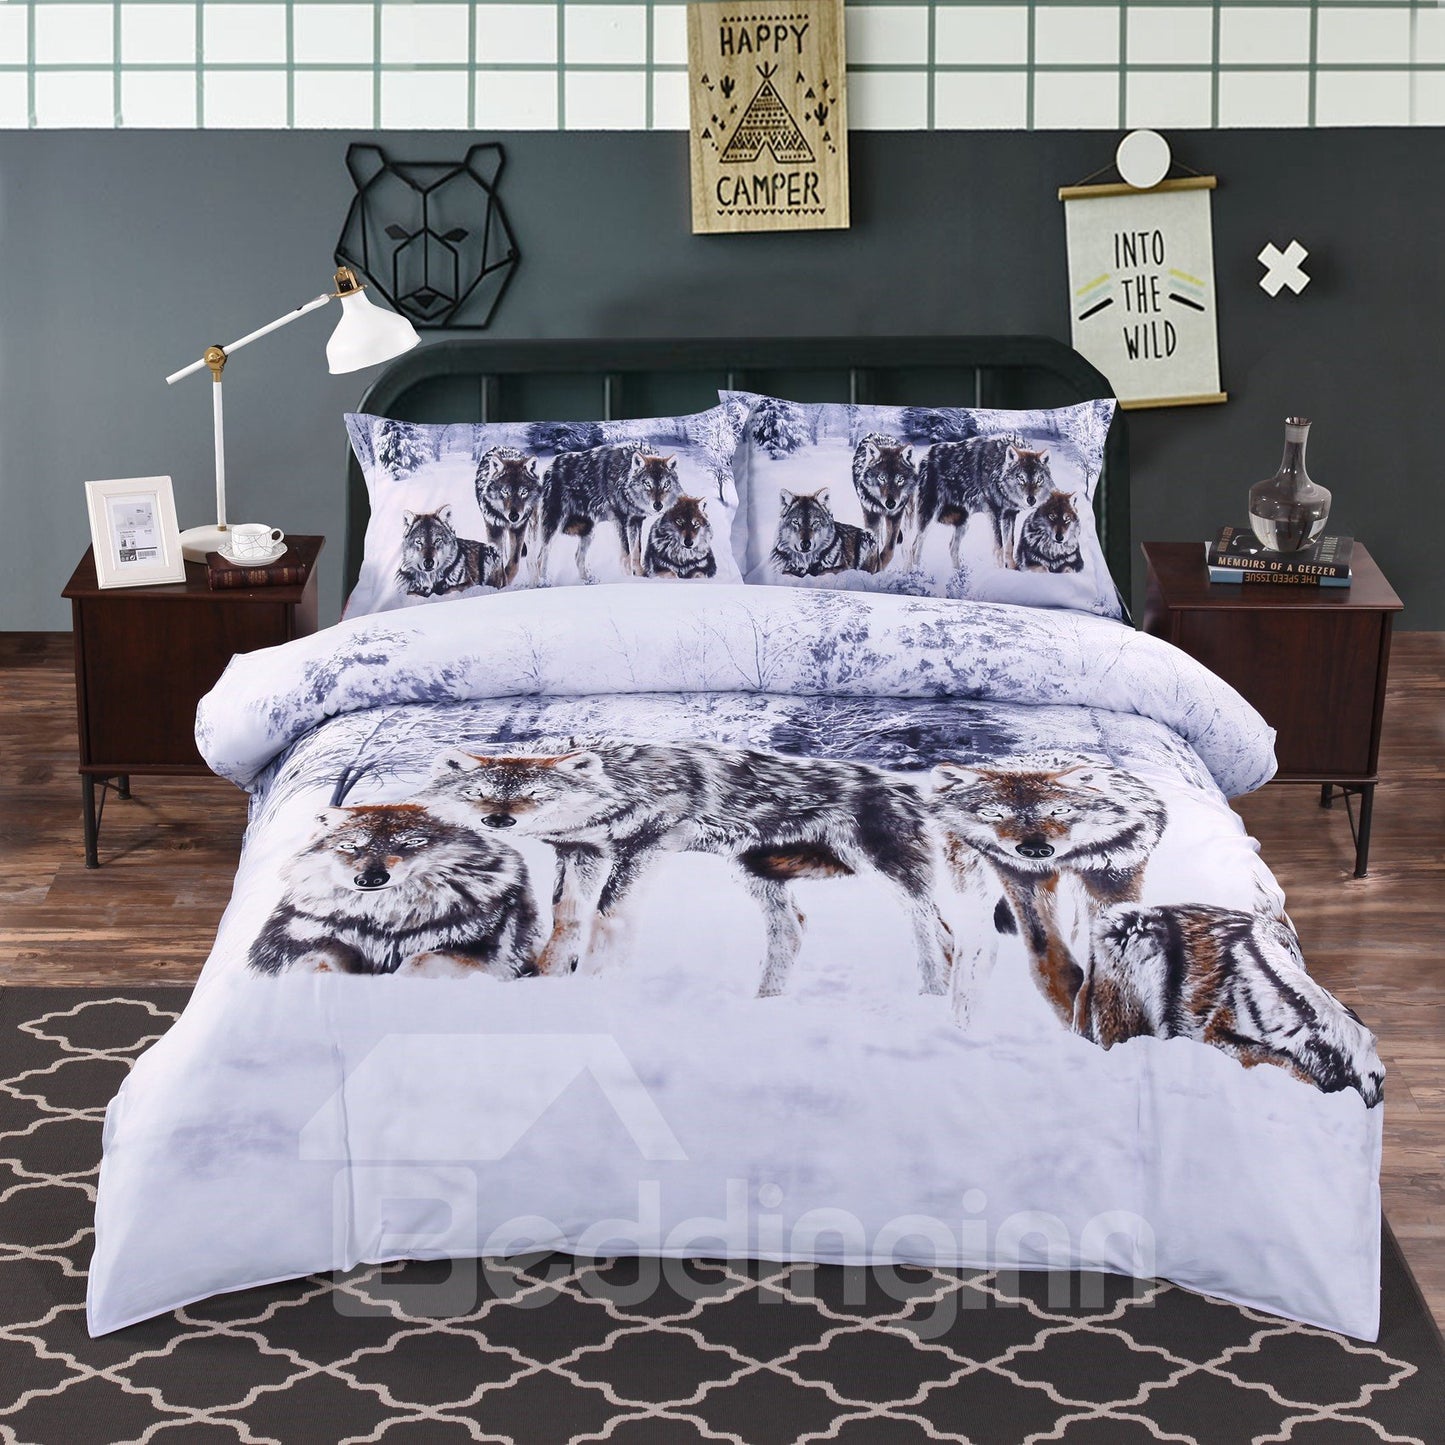 3D Snow Wolf in the Woods Printed 4-Piece Bedding Sets/Duvet Covers Microfiber